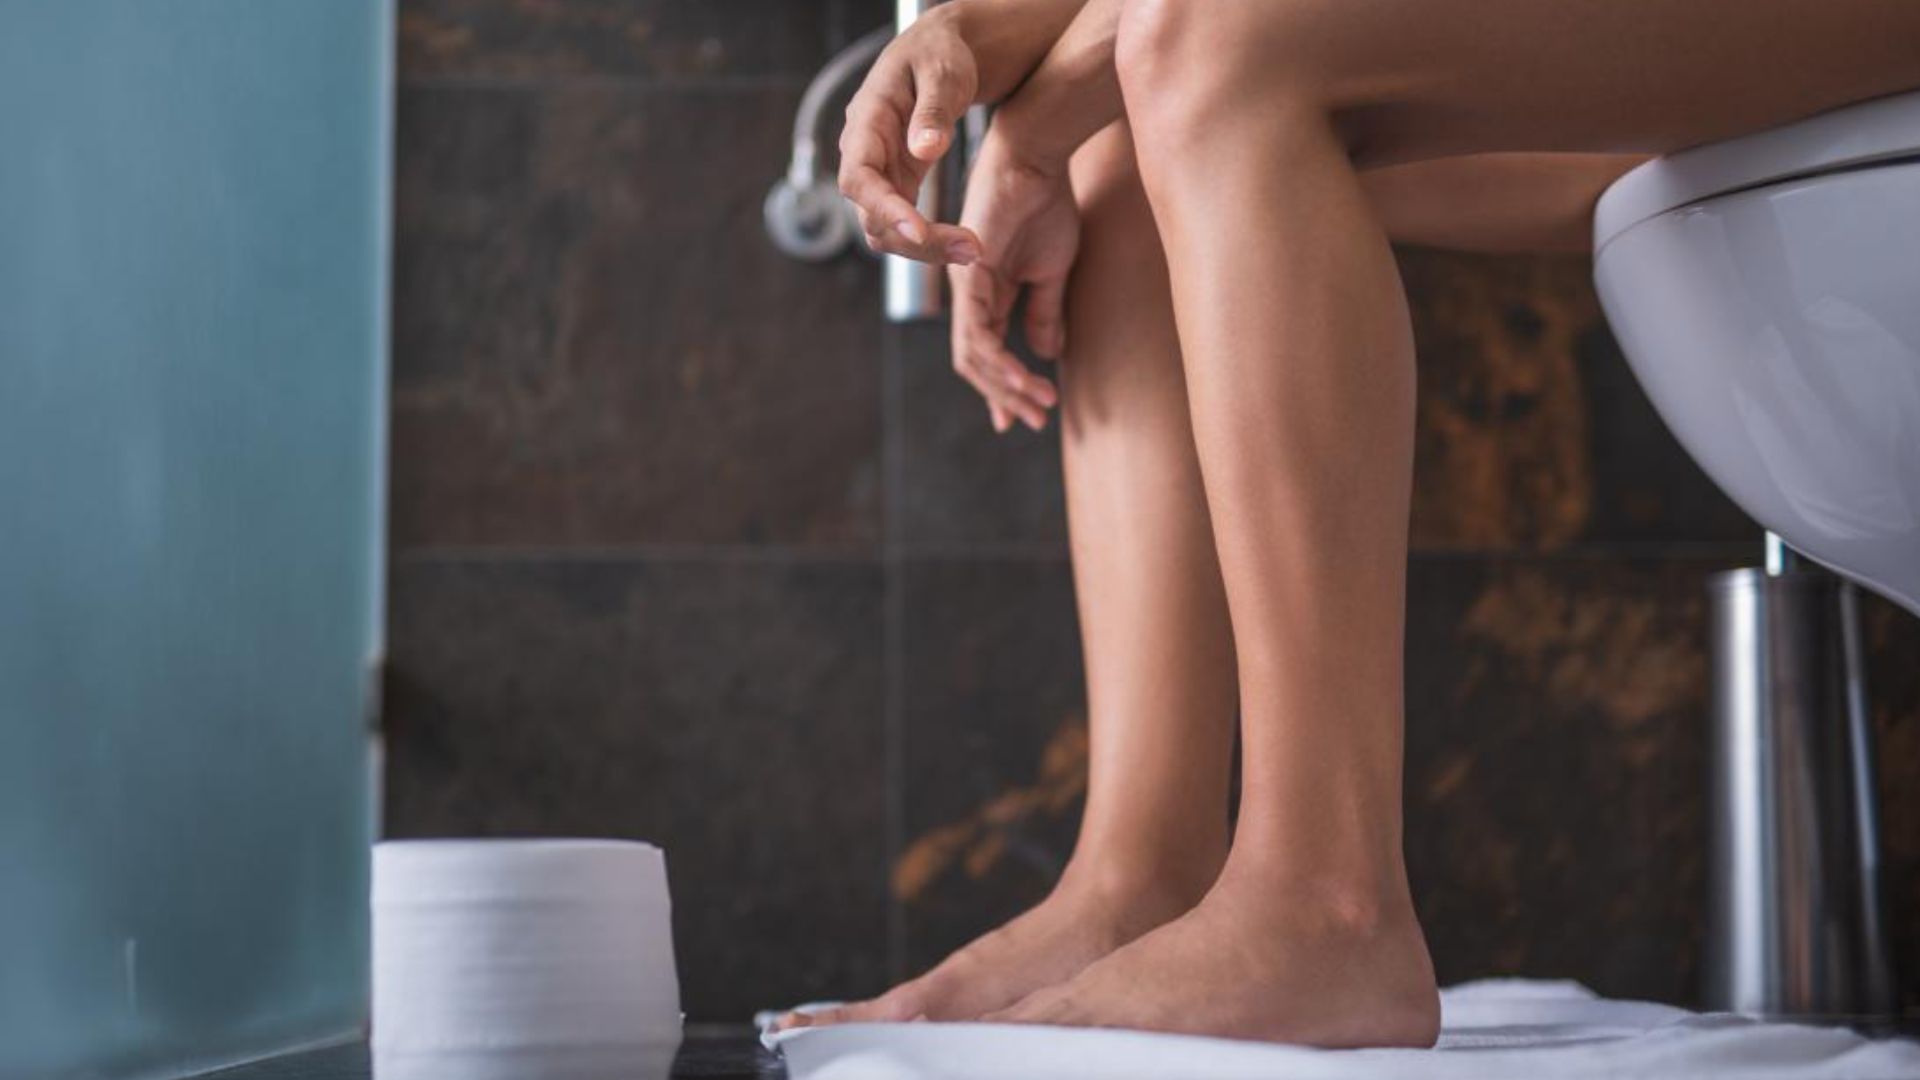 Person Sitting On Toilet With Naked Legs